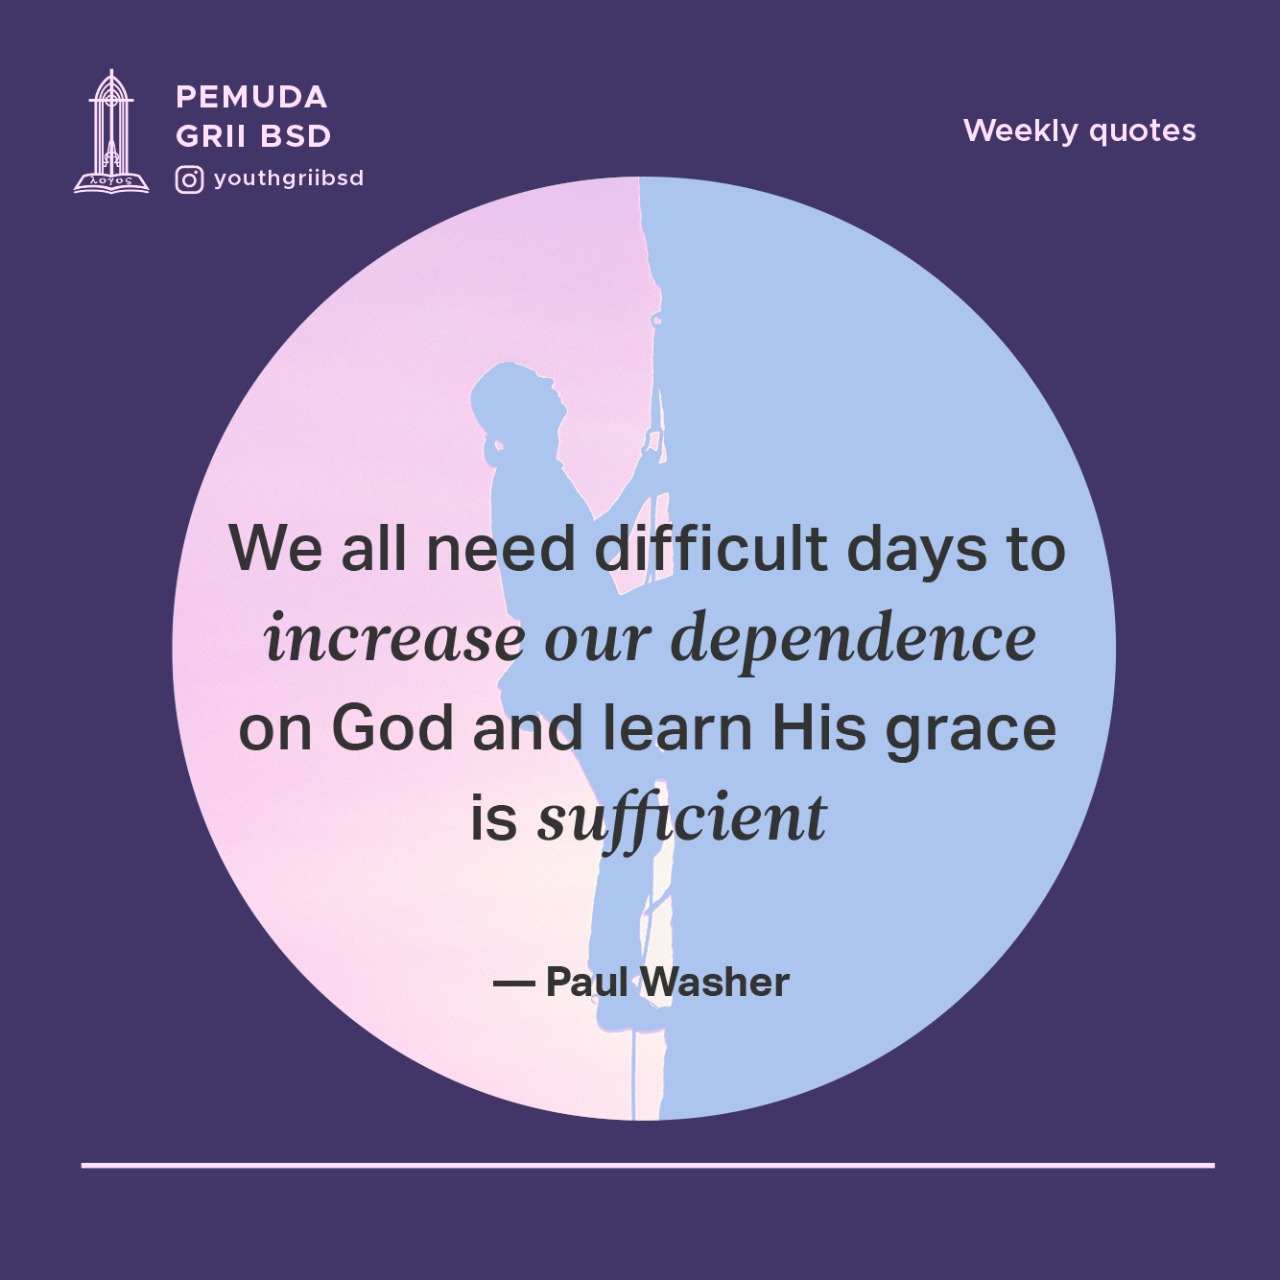 We all need difficult days to increase our dependence on God and learn His grace is sufficient.